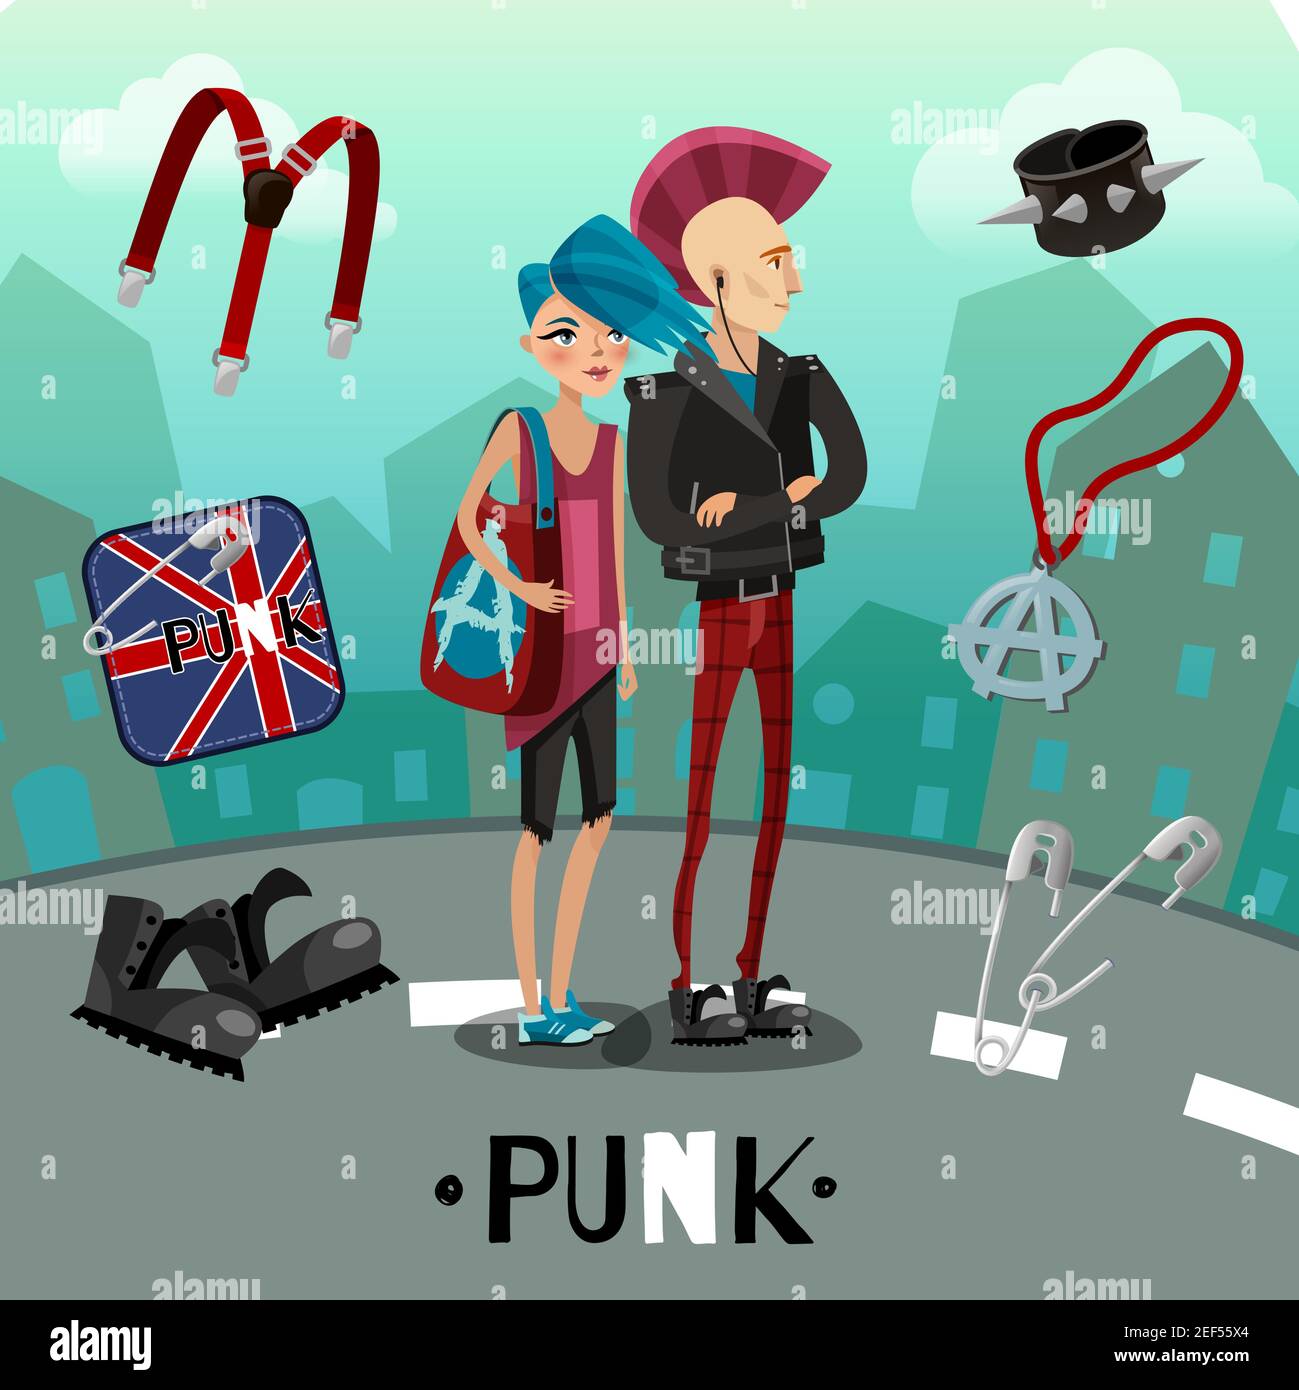 Punk subculture composition including people with flashy appearance and accessories on city background cartoon style vector illustration Stock Vector